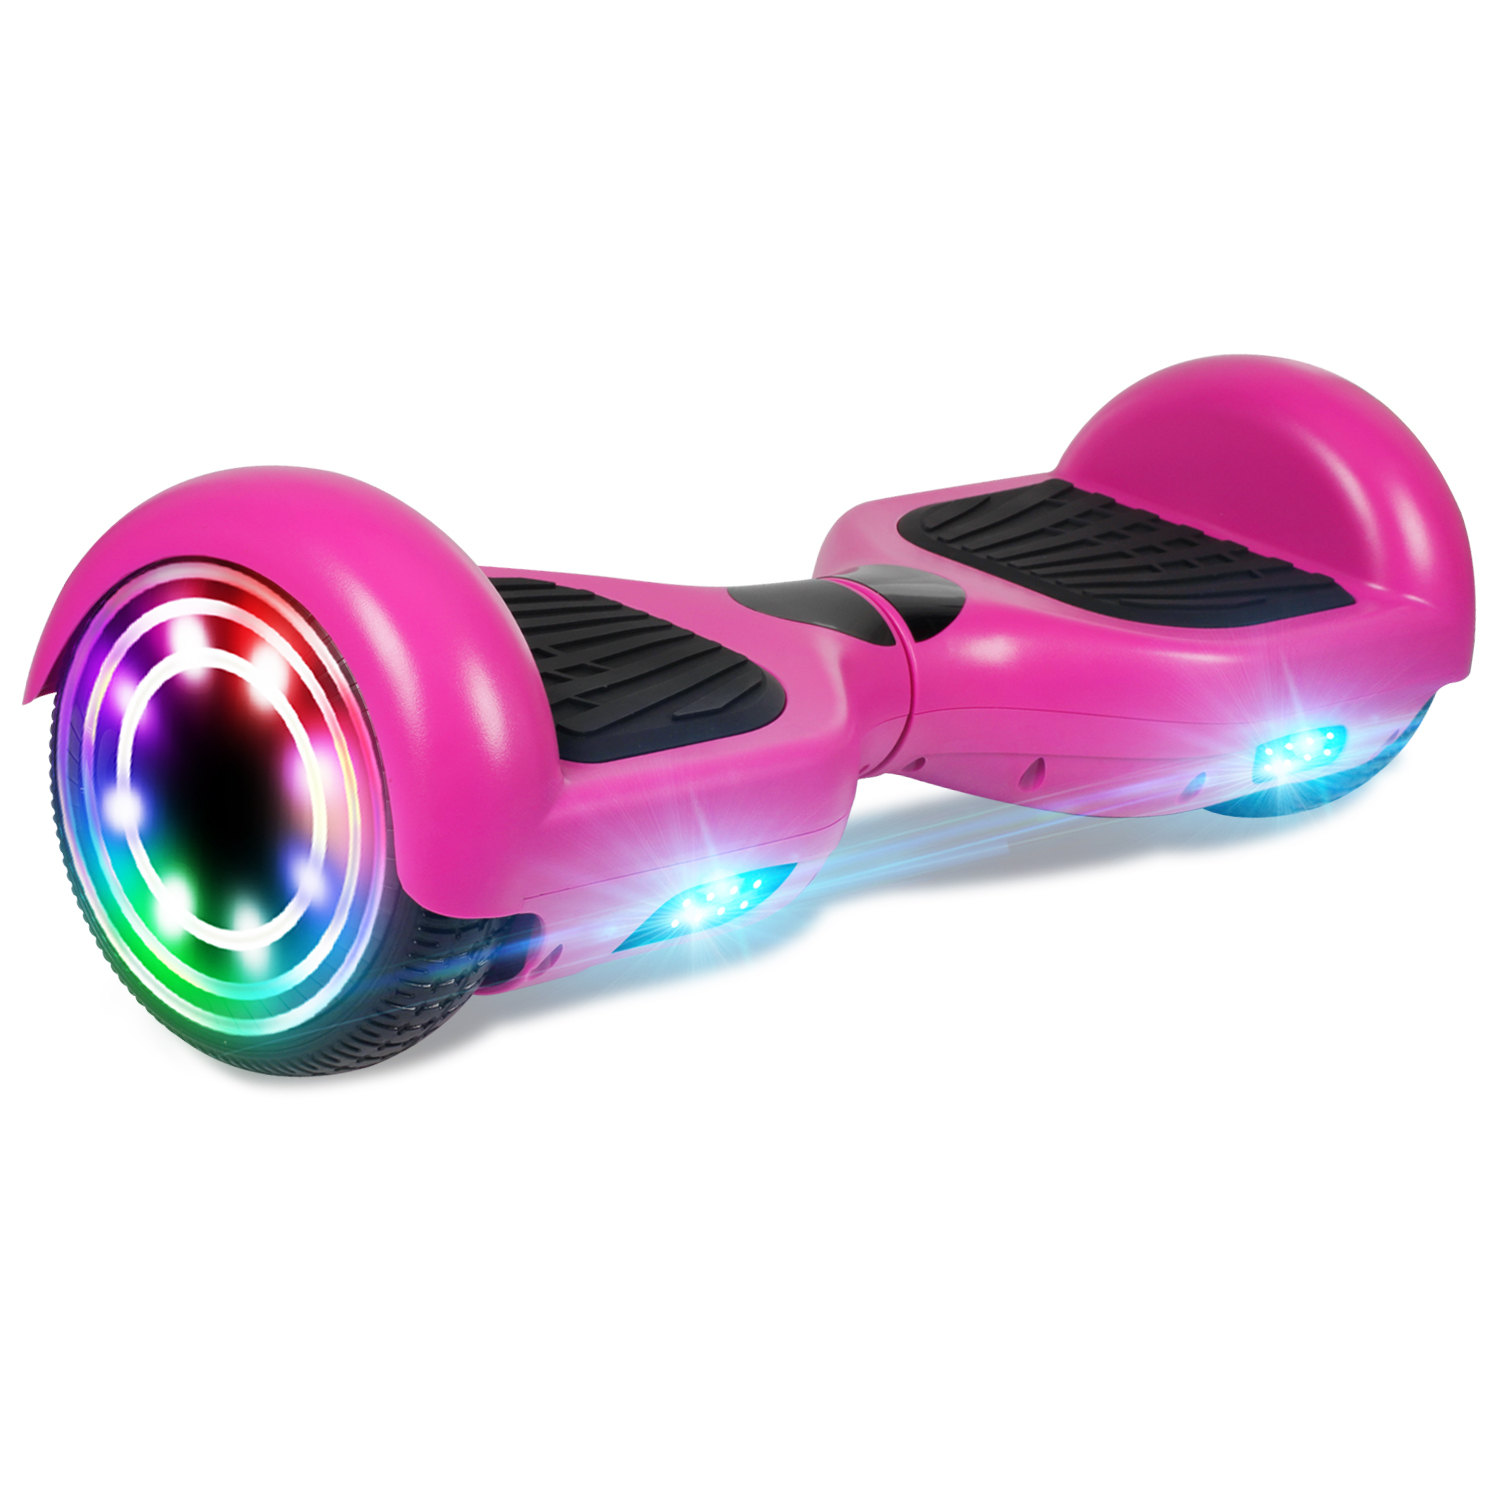 Hoverboard for Kids 6.5" Two-Wheel Self Balancing Scooter Purple